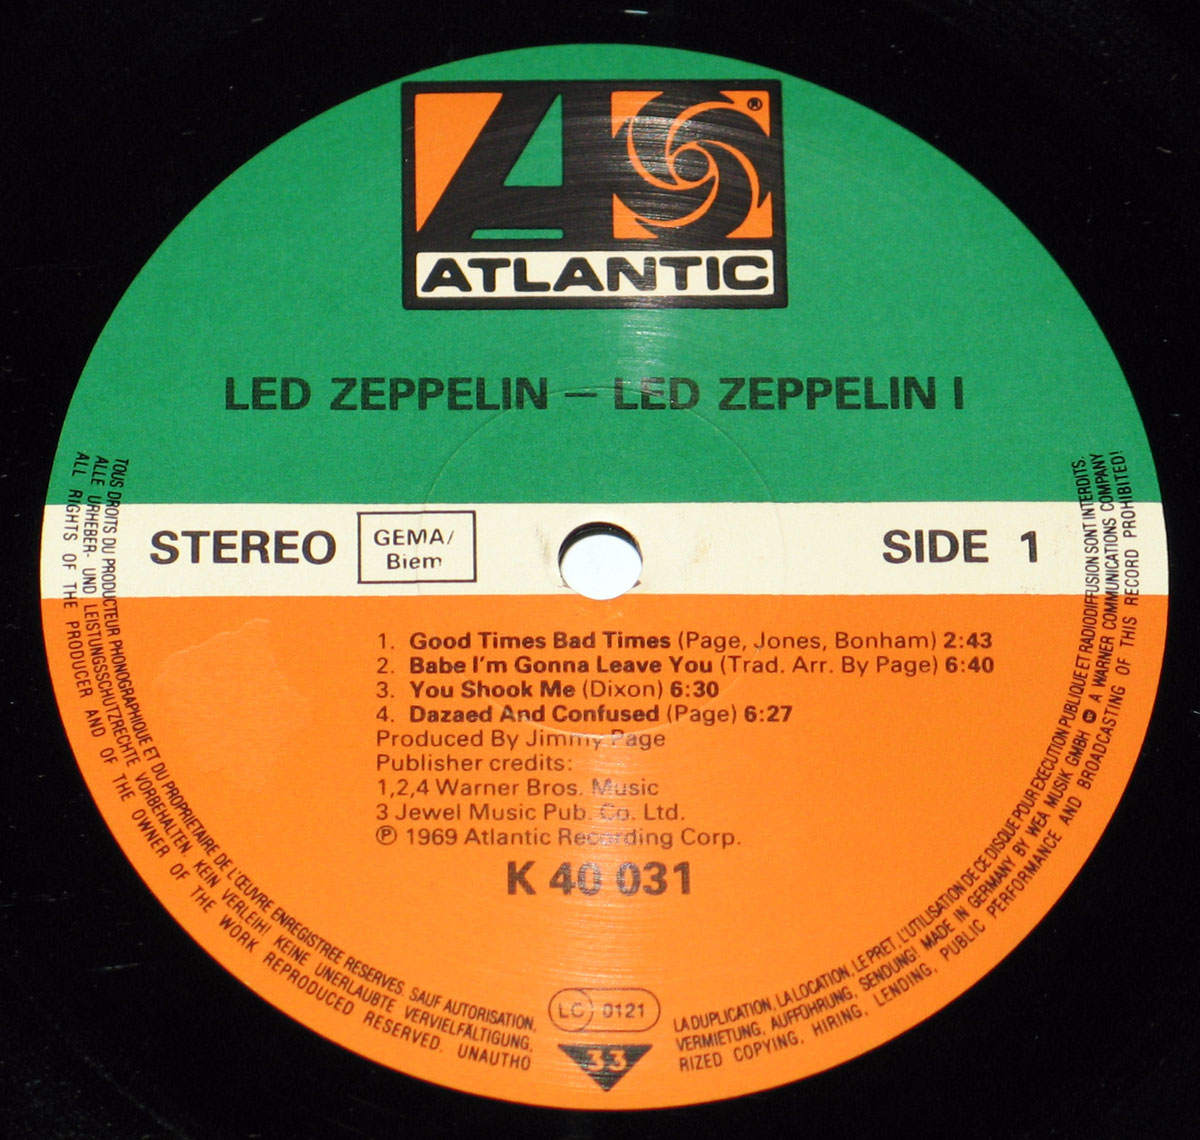 High Resolution Photo of Led Zeppelin - Self-Titled LP 